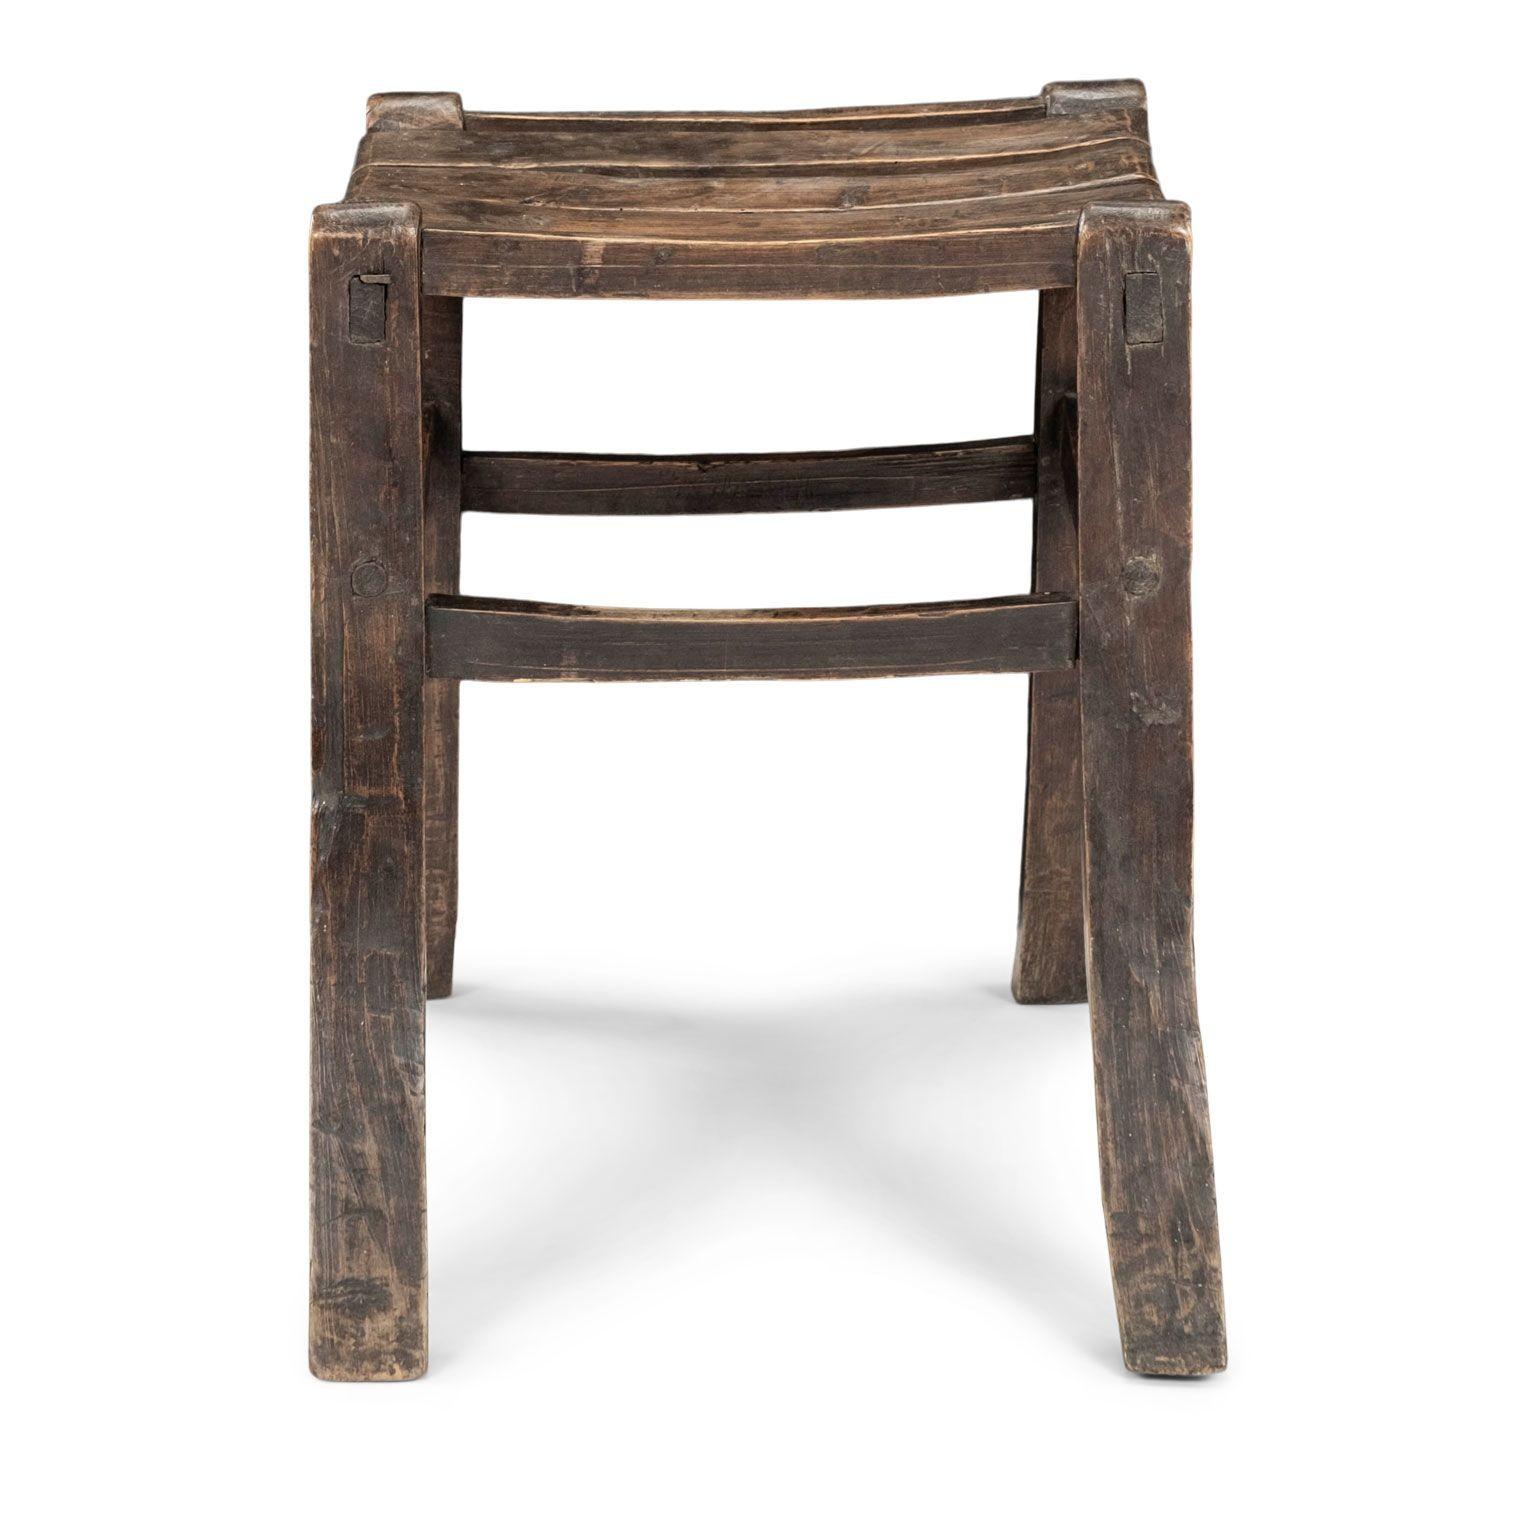 Primitive Welsh splayed leg stool with rectangular-shaped slatted seat. This charming dark brown color wooden stool was probably built and used on a farm. Contours of stool’s surface is irregular due to the crude tools used by its maker in the